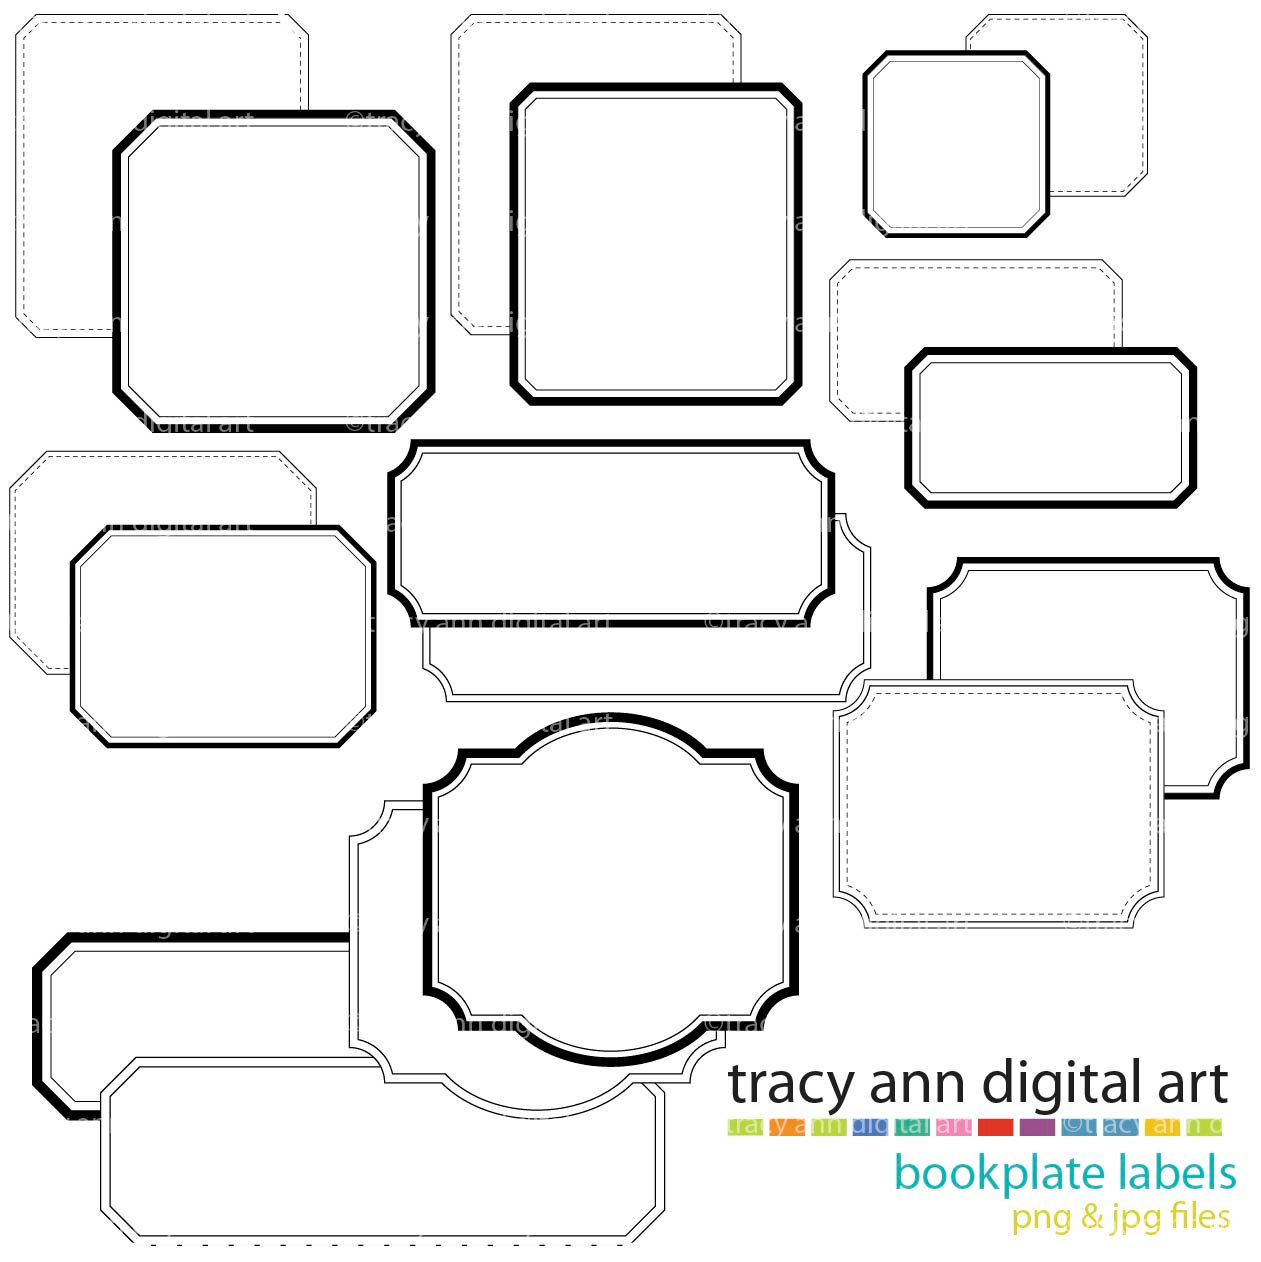 clipart label free - photo #43